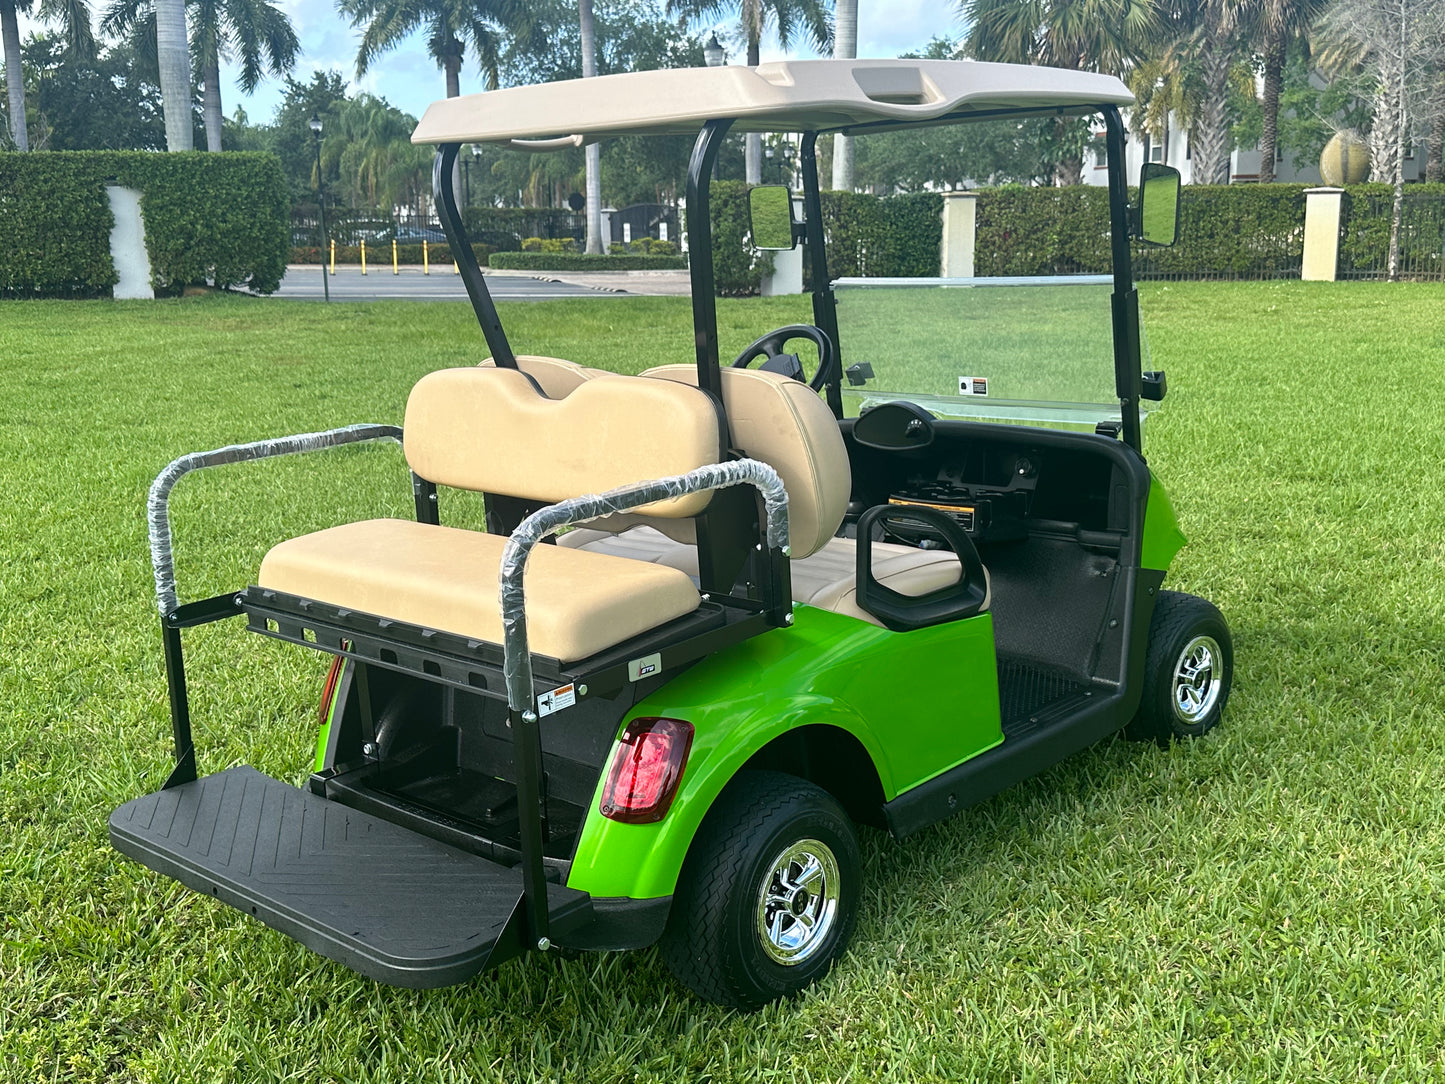 Cutting Edge Golf Carts - 48V 2020 Green Go E-Z-GO RXV, striking color, chrome hubcaps, fold-down back seat, deluxe light package with turn signals and horn.








